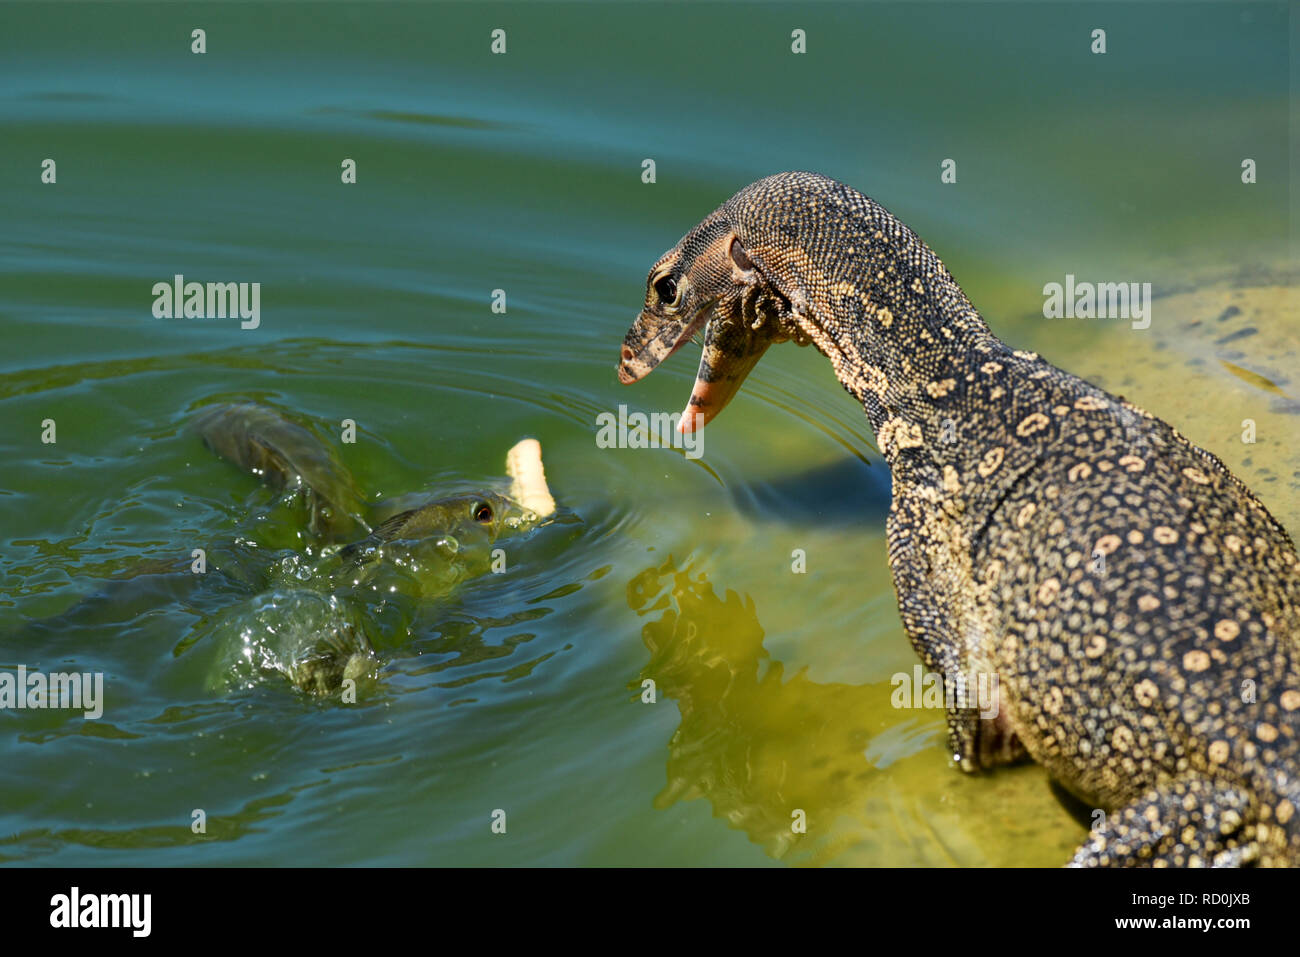 Monitor lizard standing by a lake trying to catch a fish, Indonesia Stock Photo